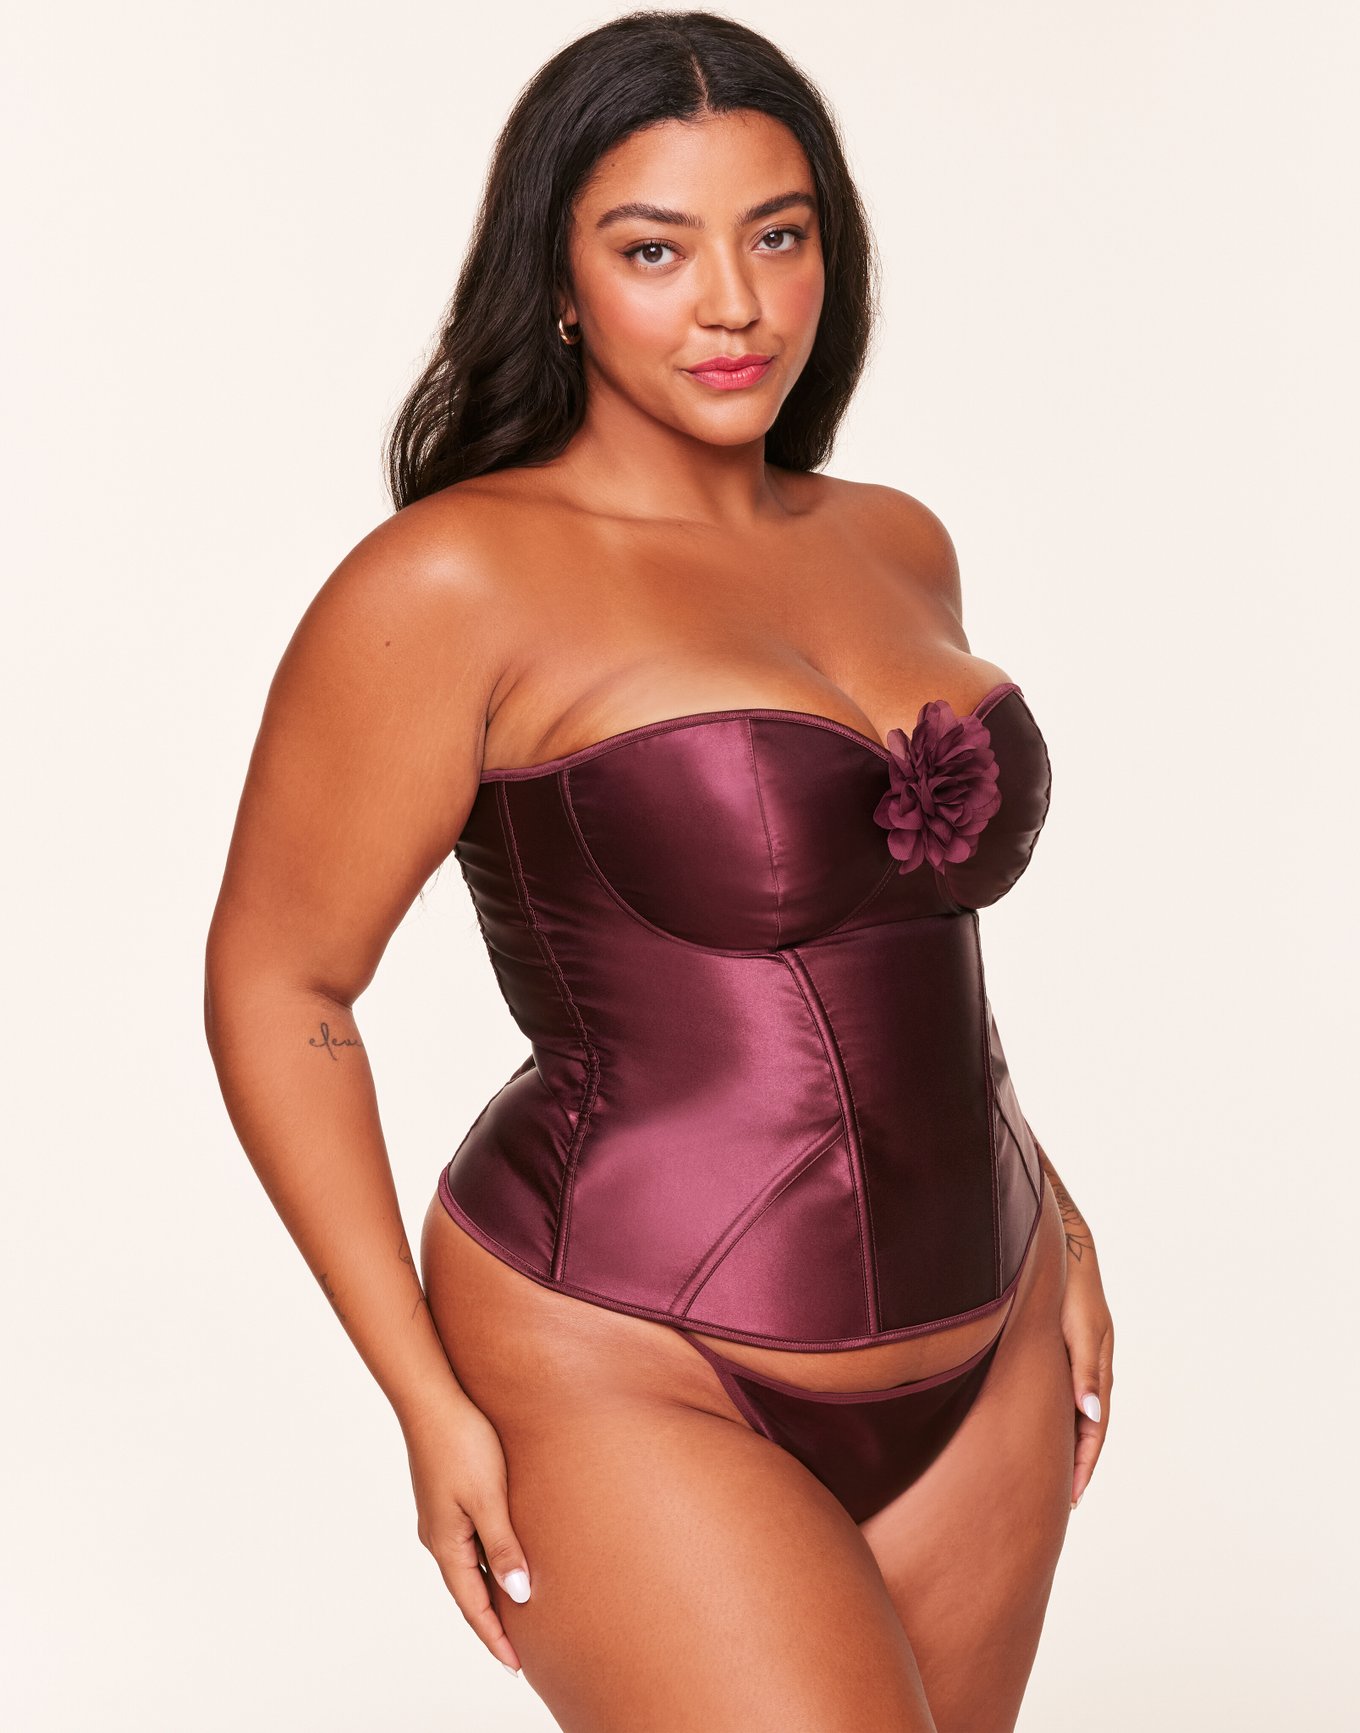 Aayomet Plus Size Shapewear Corset Bridal Dress Bottom Shaping Dress Court  Corset Can Be Worn Inside Or Outside,A XXL